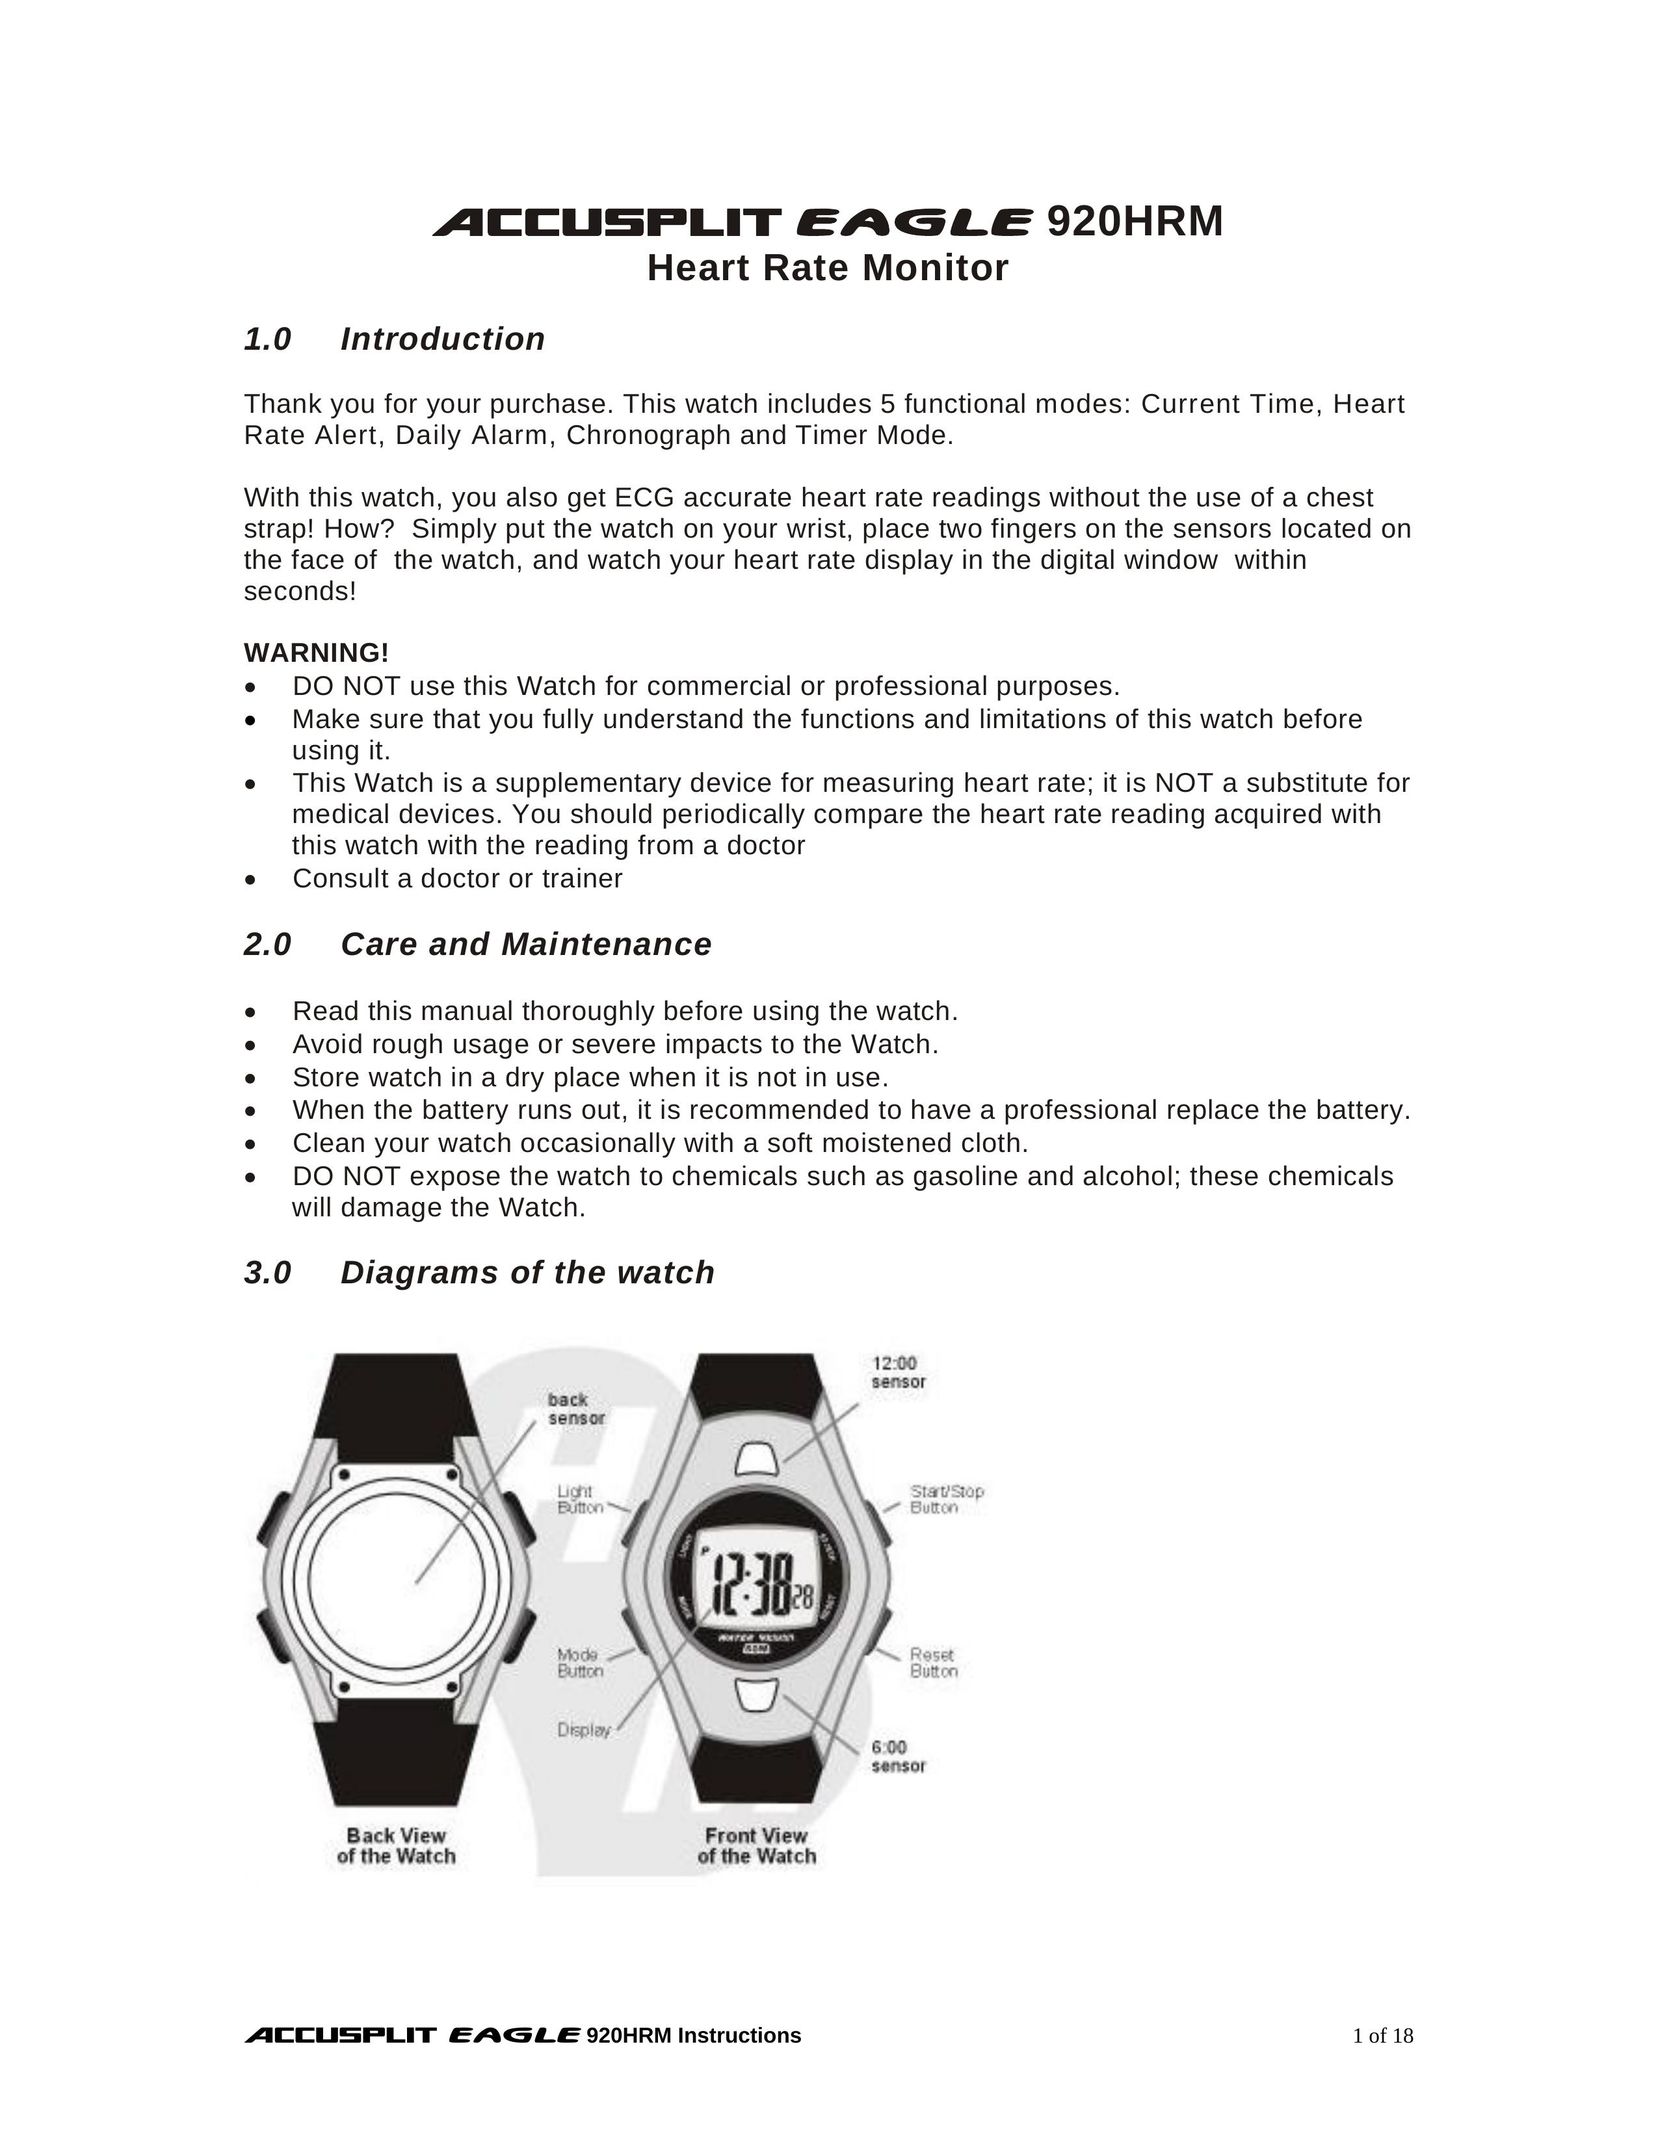 Accusplit EAGLE 920HRM Heart Rate Monitor User Manual